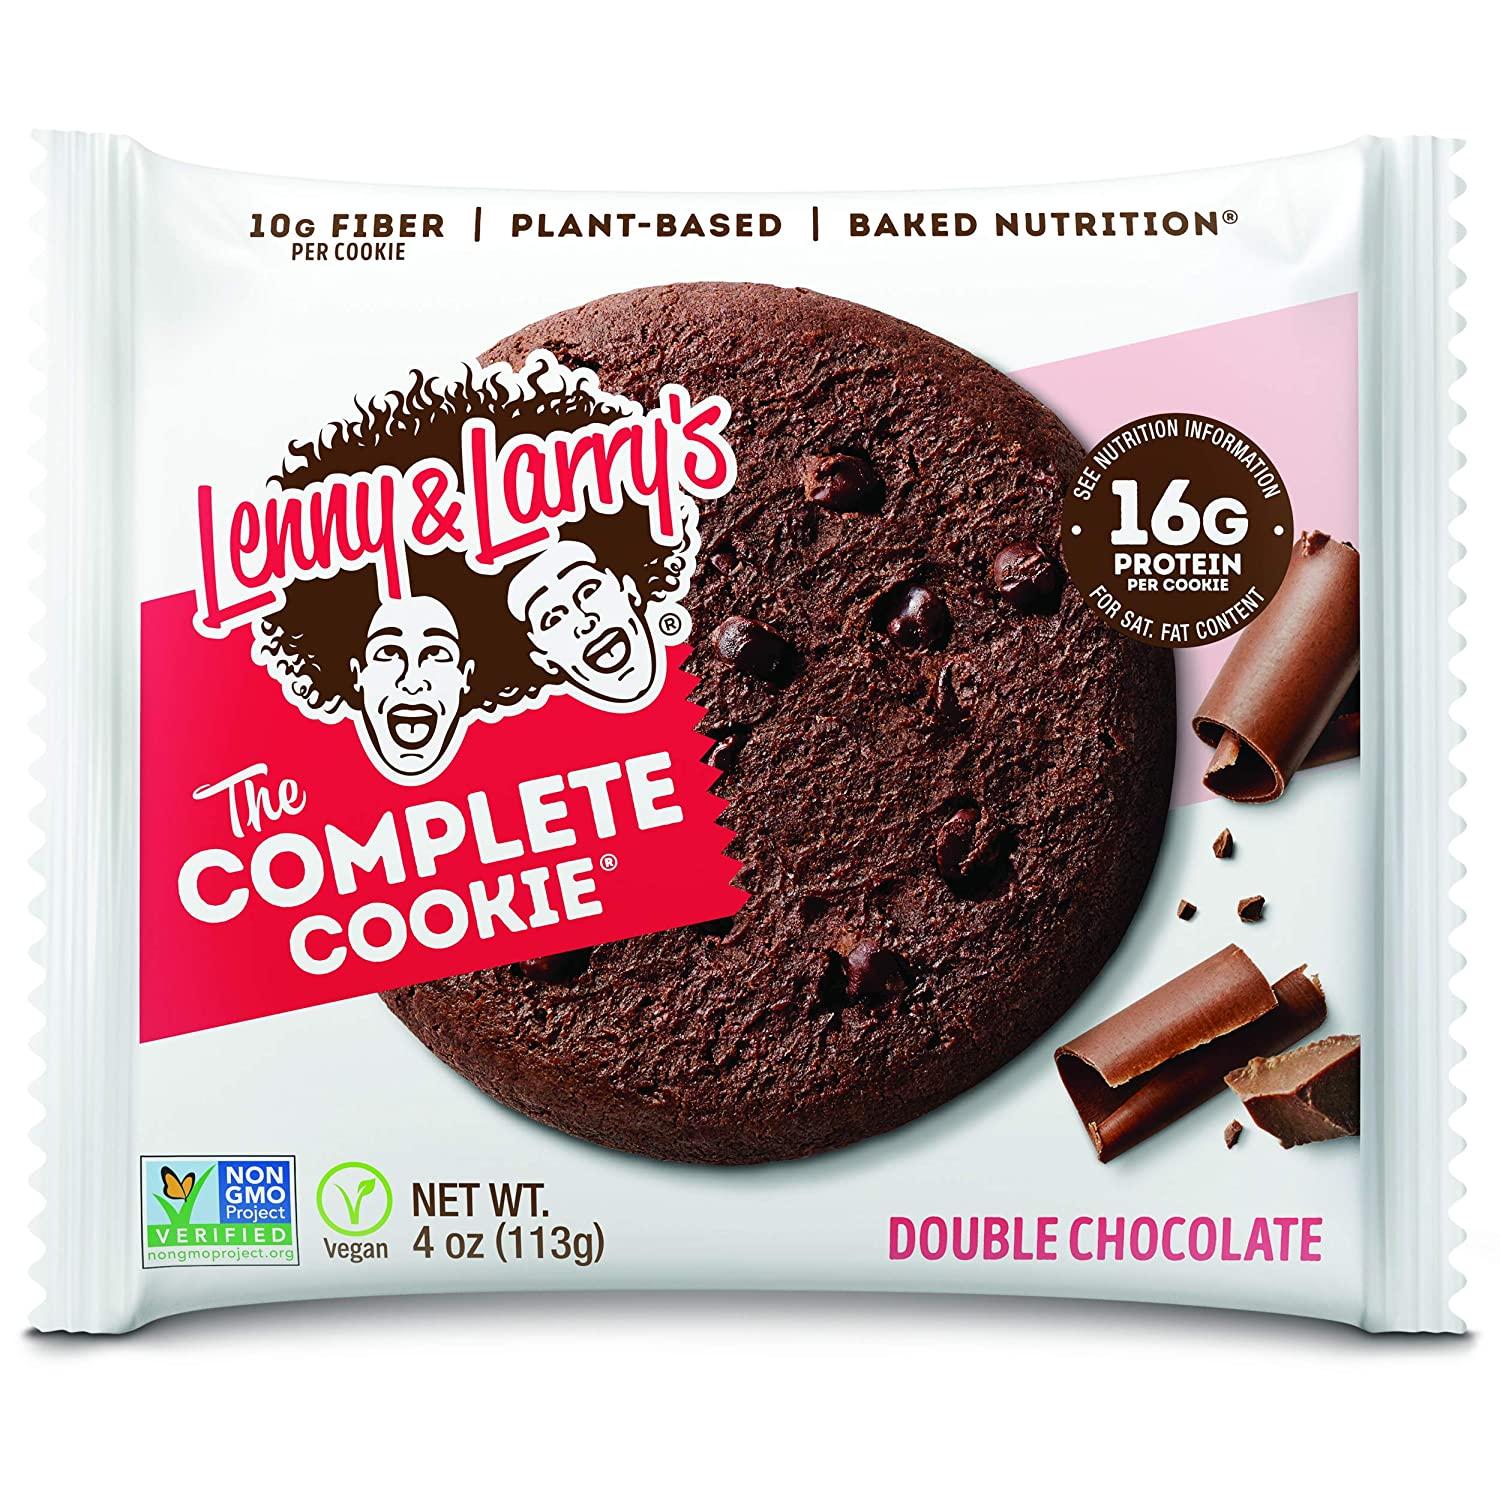 12 Lenny and Larrys 16g Protein Cookies for $11.45 Shipped